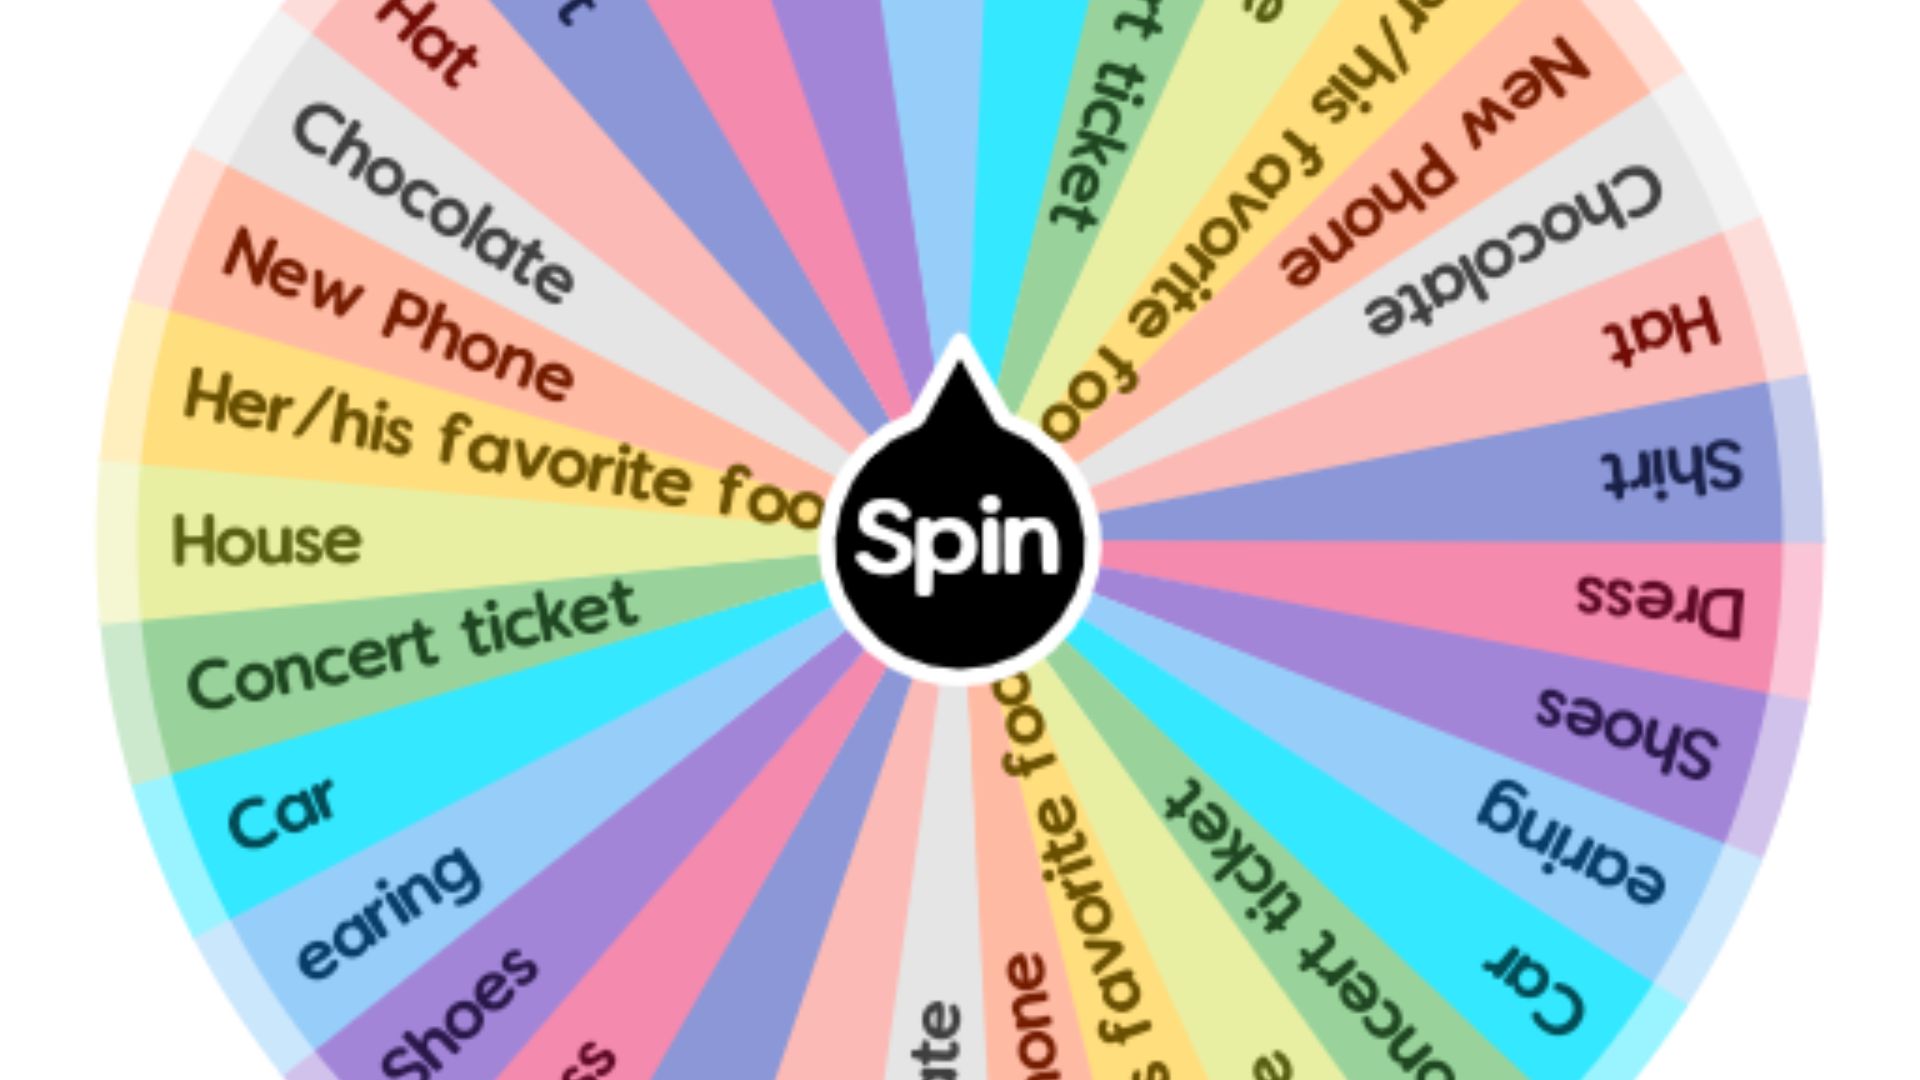 this image shows Spin Wheel for Selecting Gifts